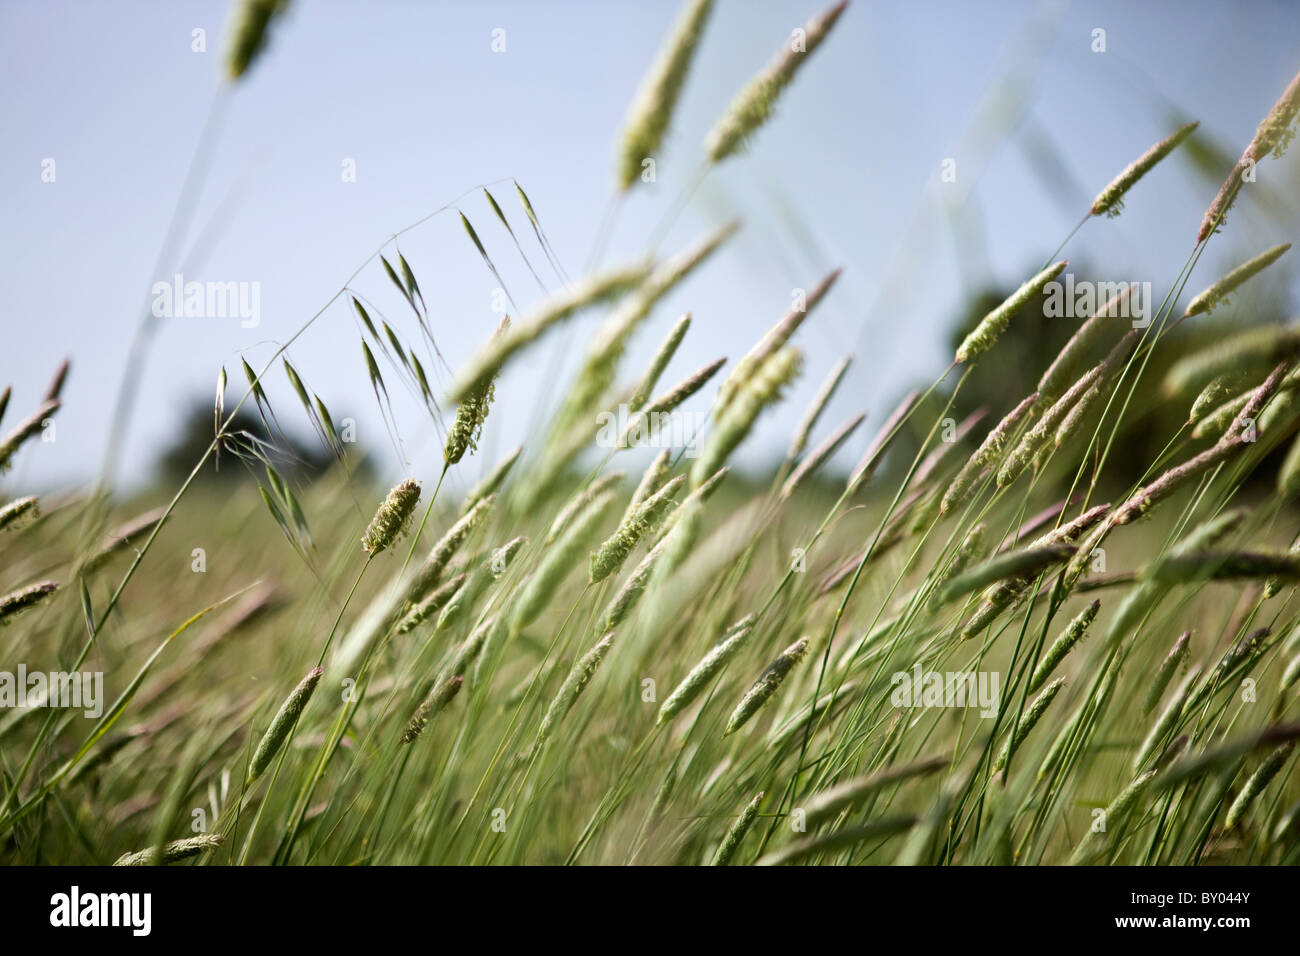 Wild grasses growing in a summer meadow Stock Photo